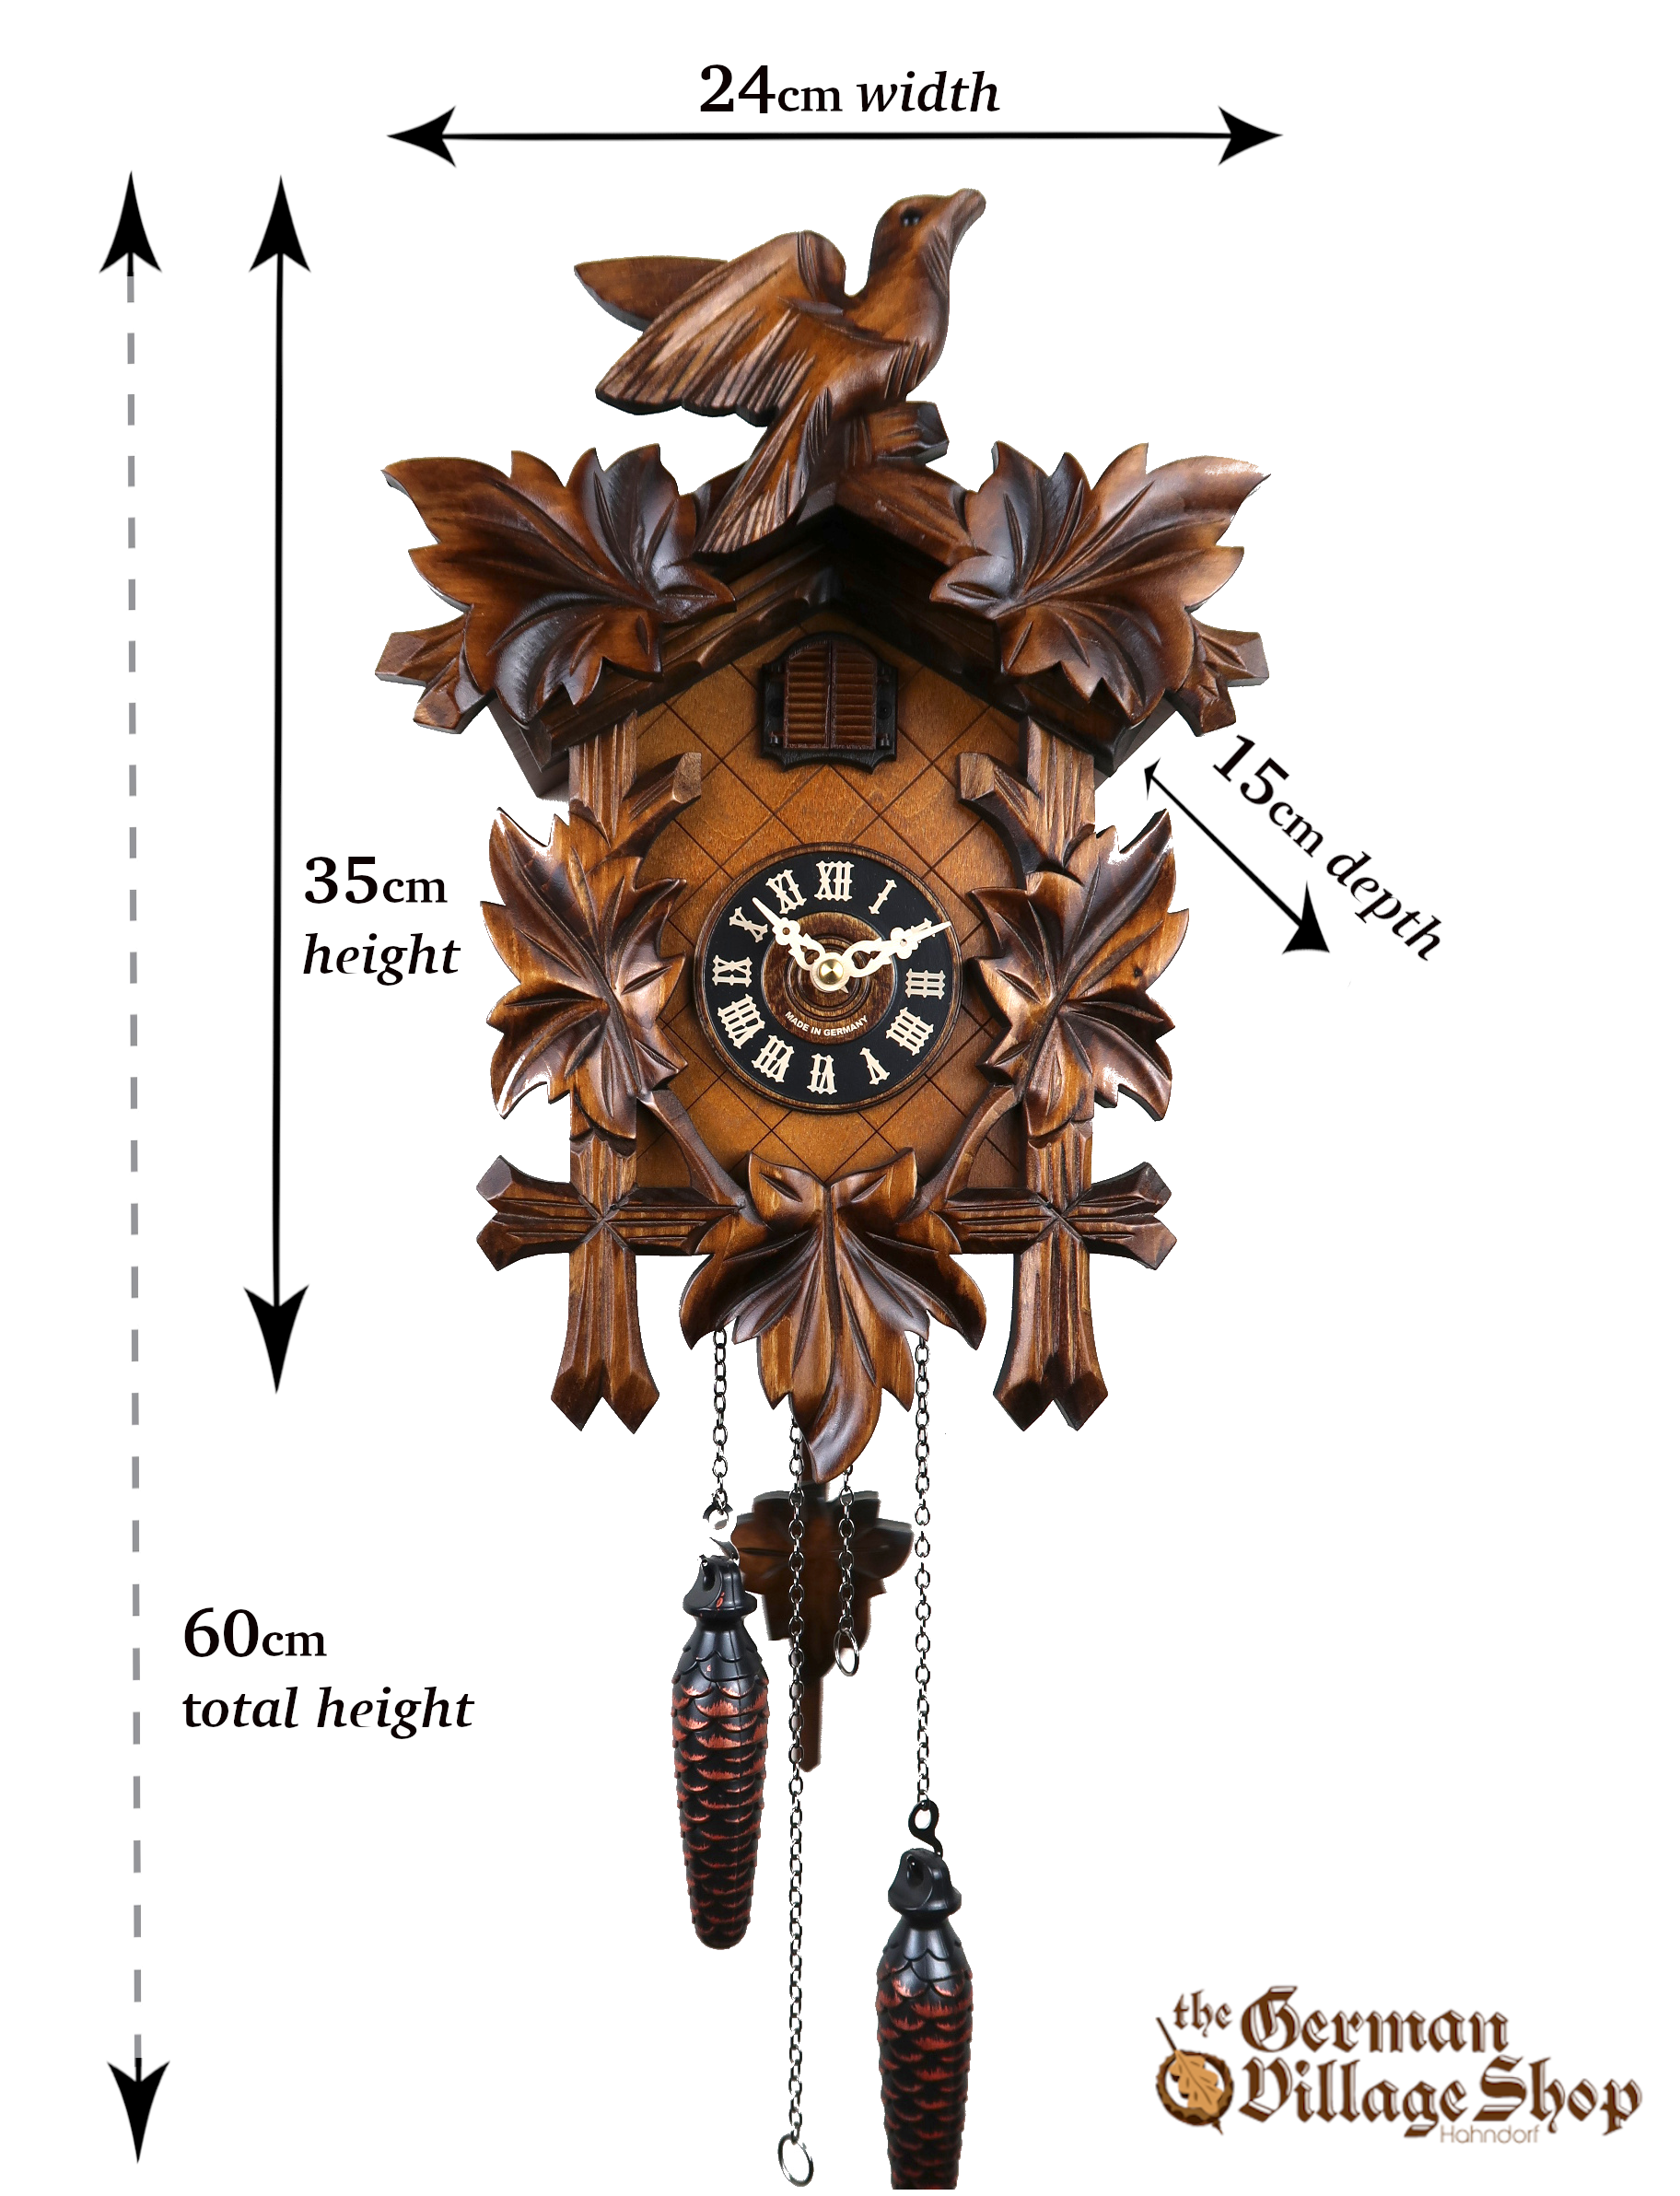 German Cuckoo Clock imported and for sale in Australia